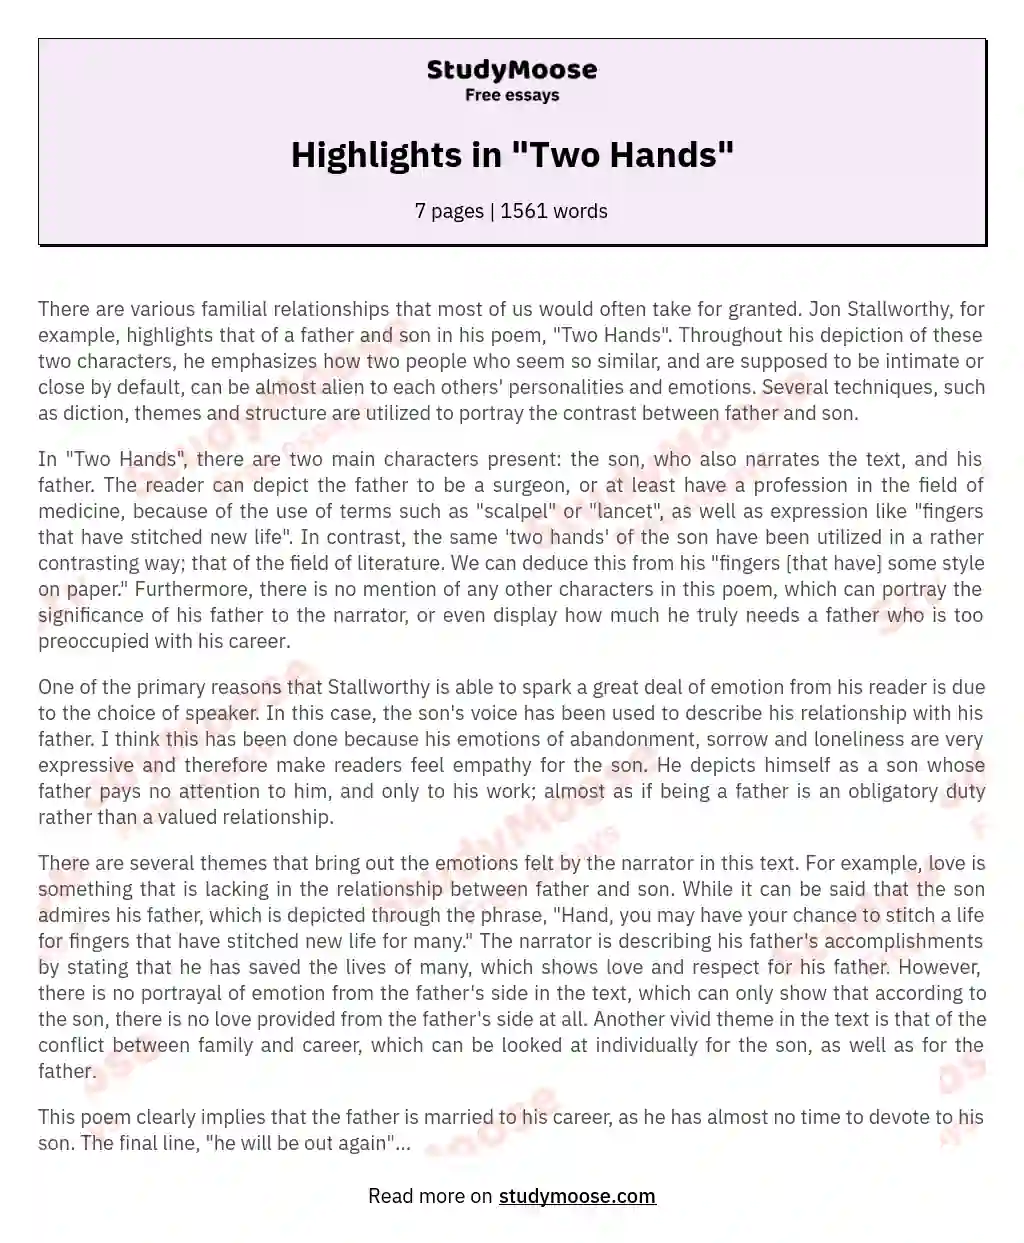 Highlights in "Two Hands" essay